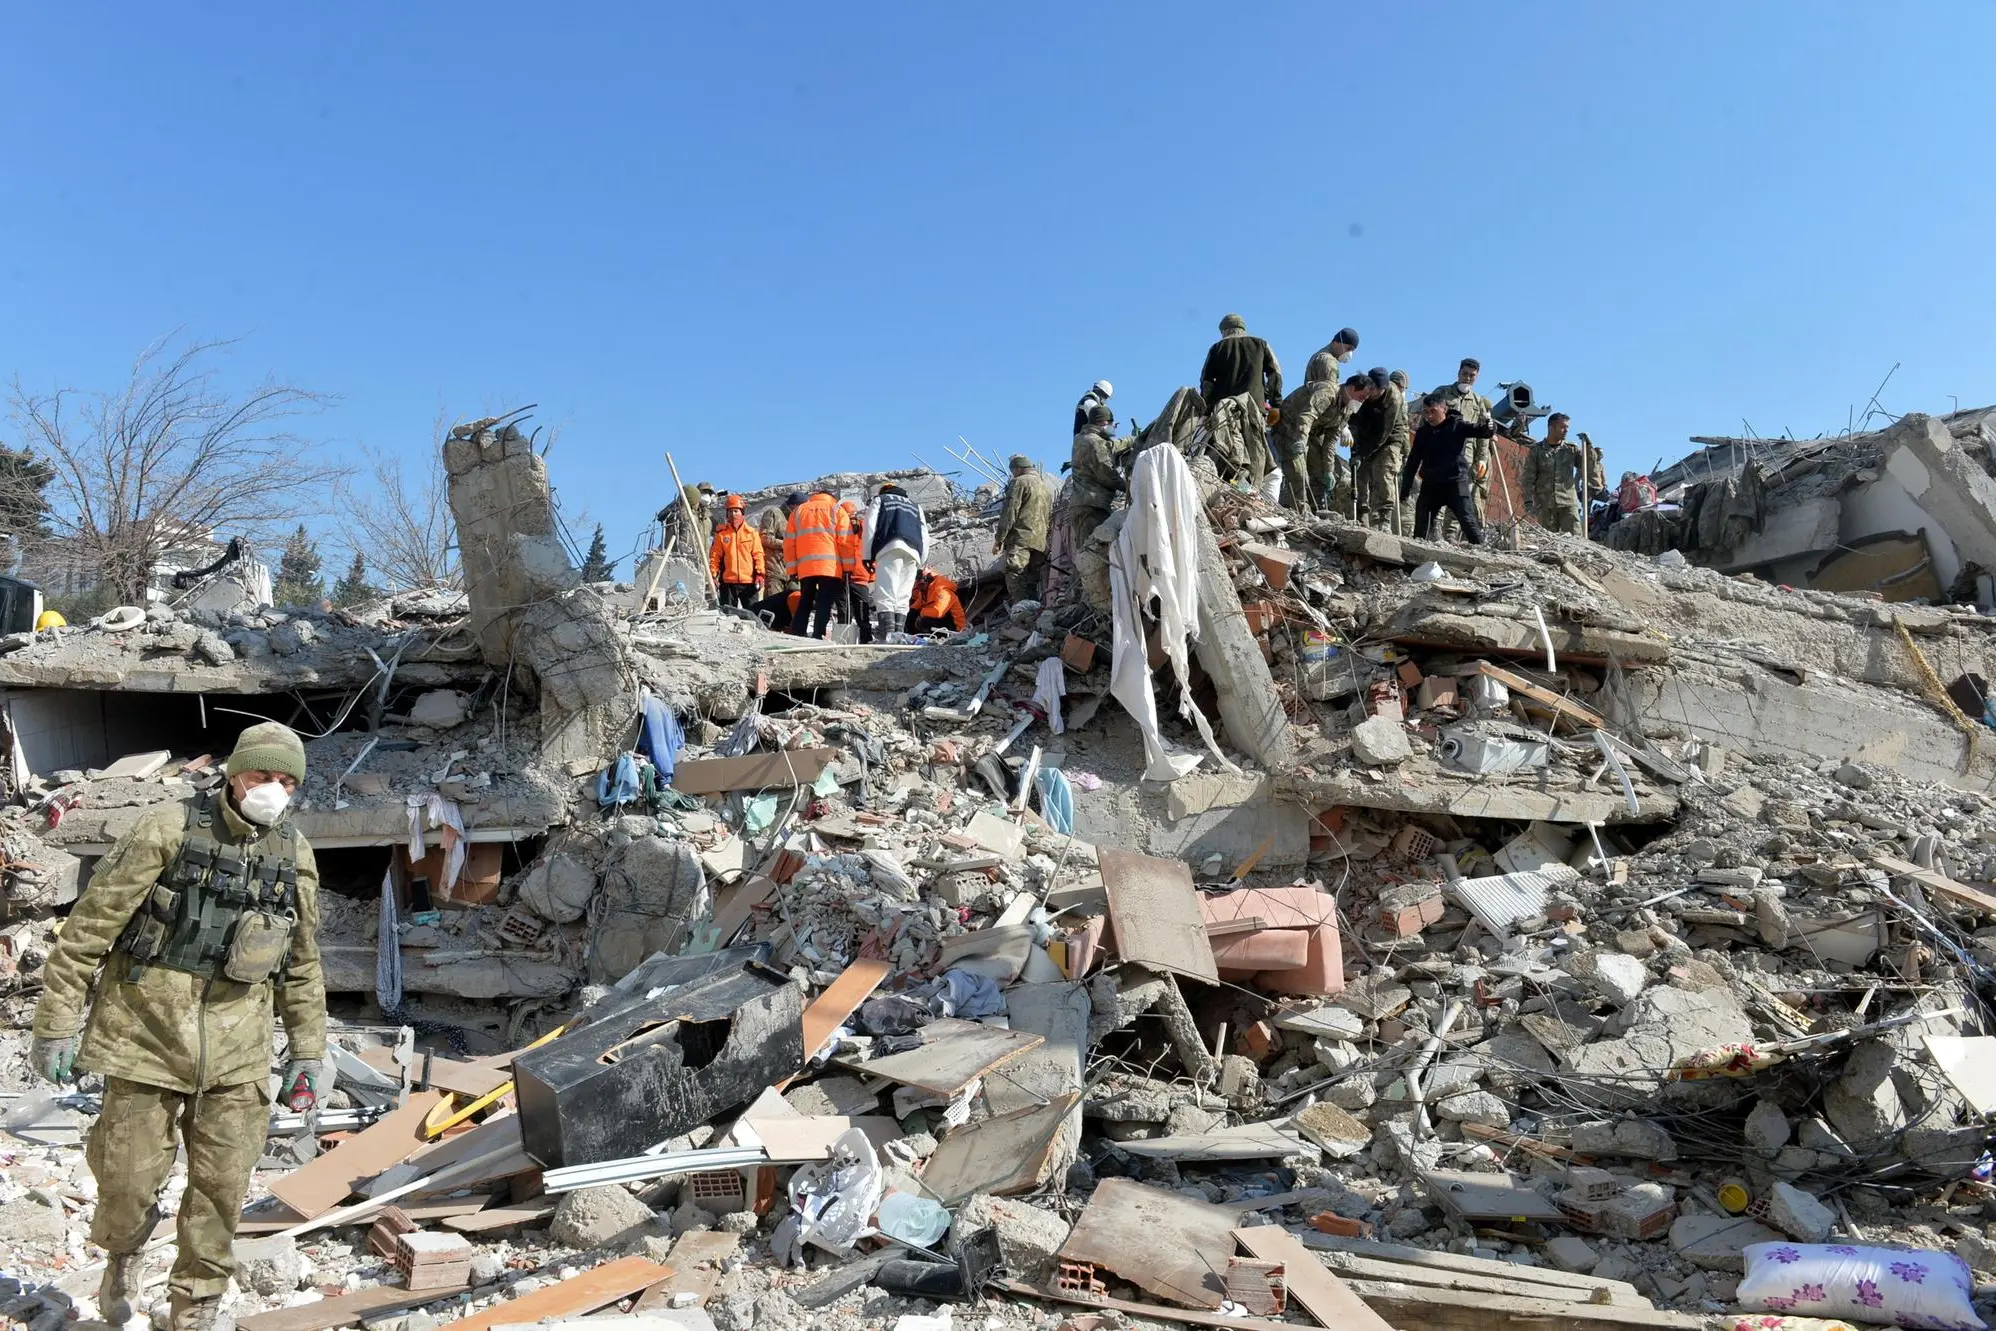 epa10460778 Turkish soldiers search for victims at a collapsed building in the aftermath of a major earthquake in Islahiye district of Gaziantep city, Turkey, 11 February 2023. More than 24,000 people have died and thousands more are injured after two major earthquakes struck southern Turkey and northern Syria on 06 February. Authorities fear the death toll will keep climbing as rescuers look for survivors across the region. EPA/NECATI SAVAS